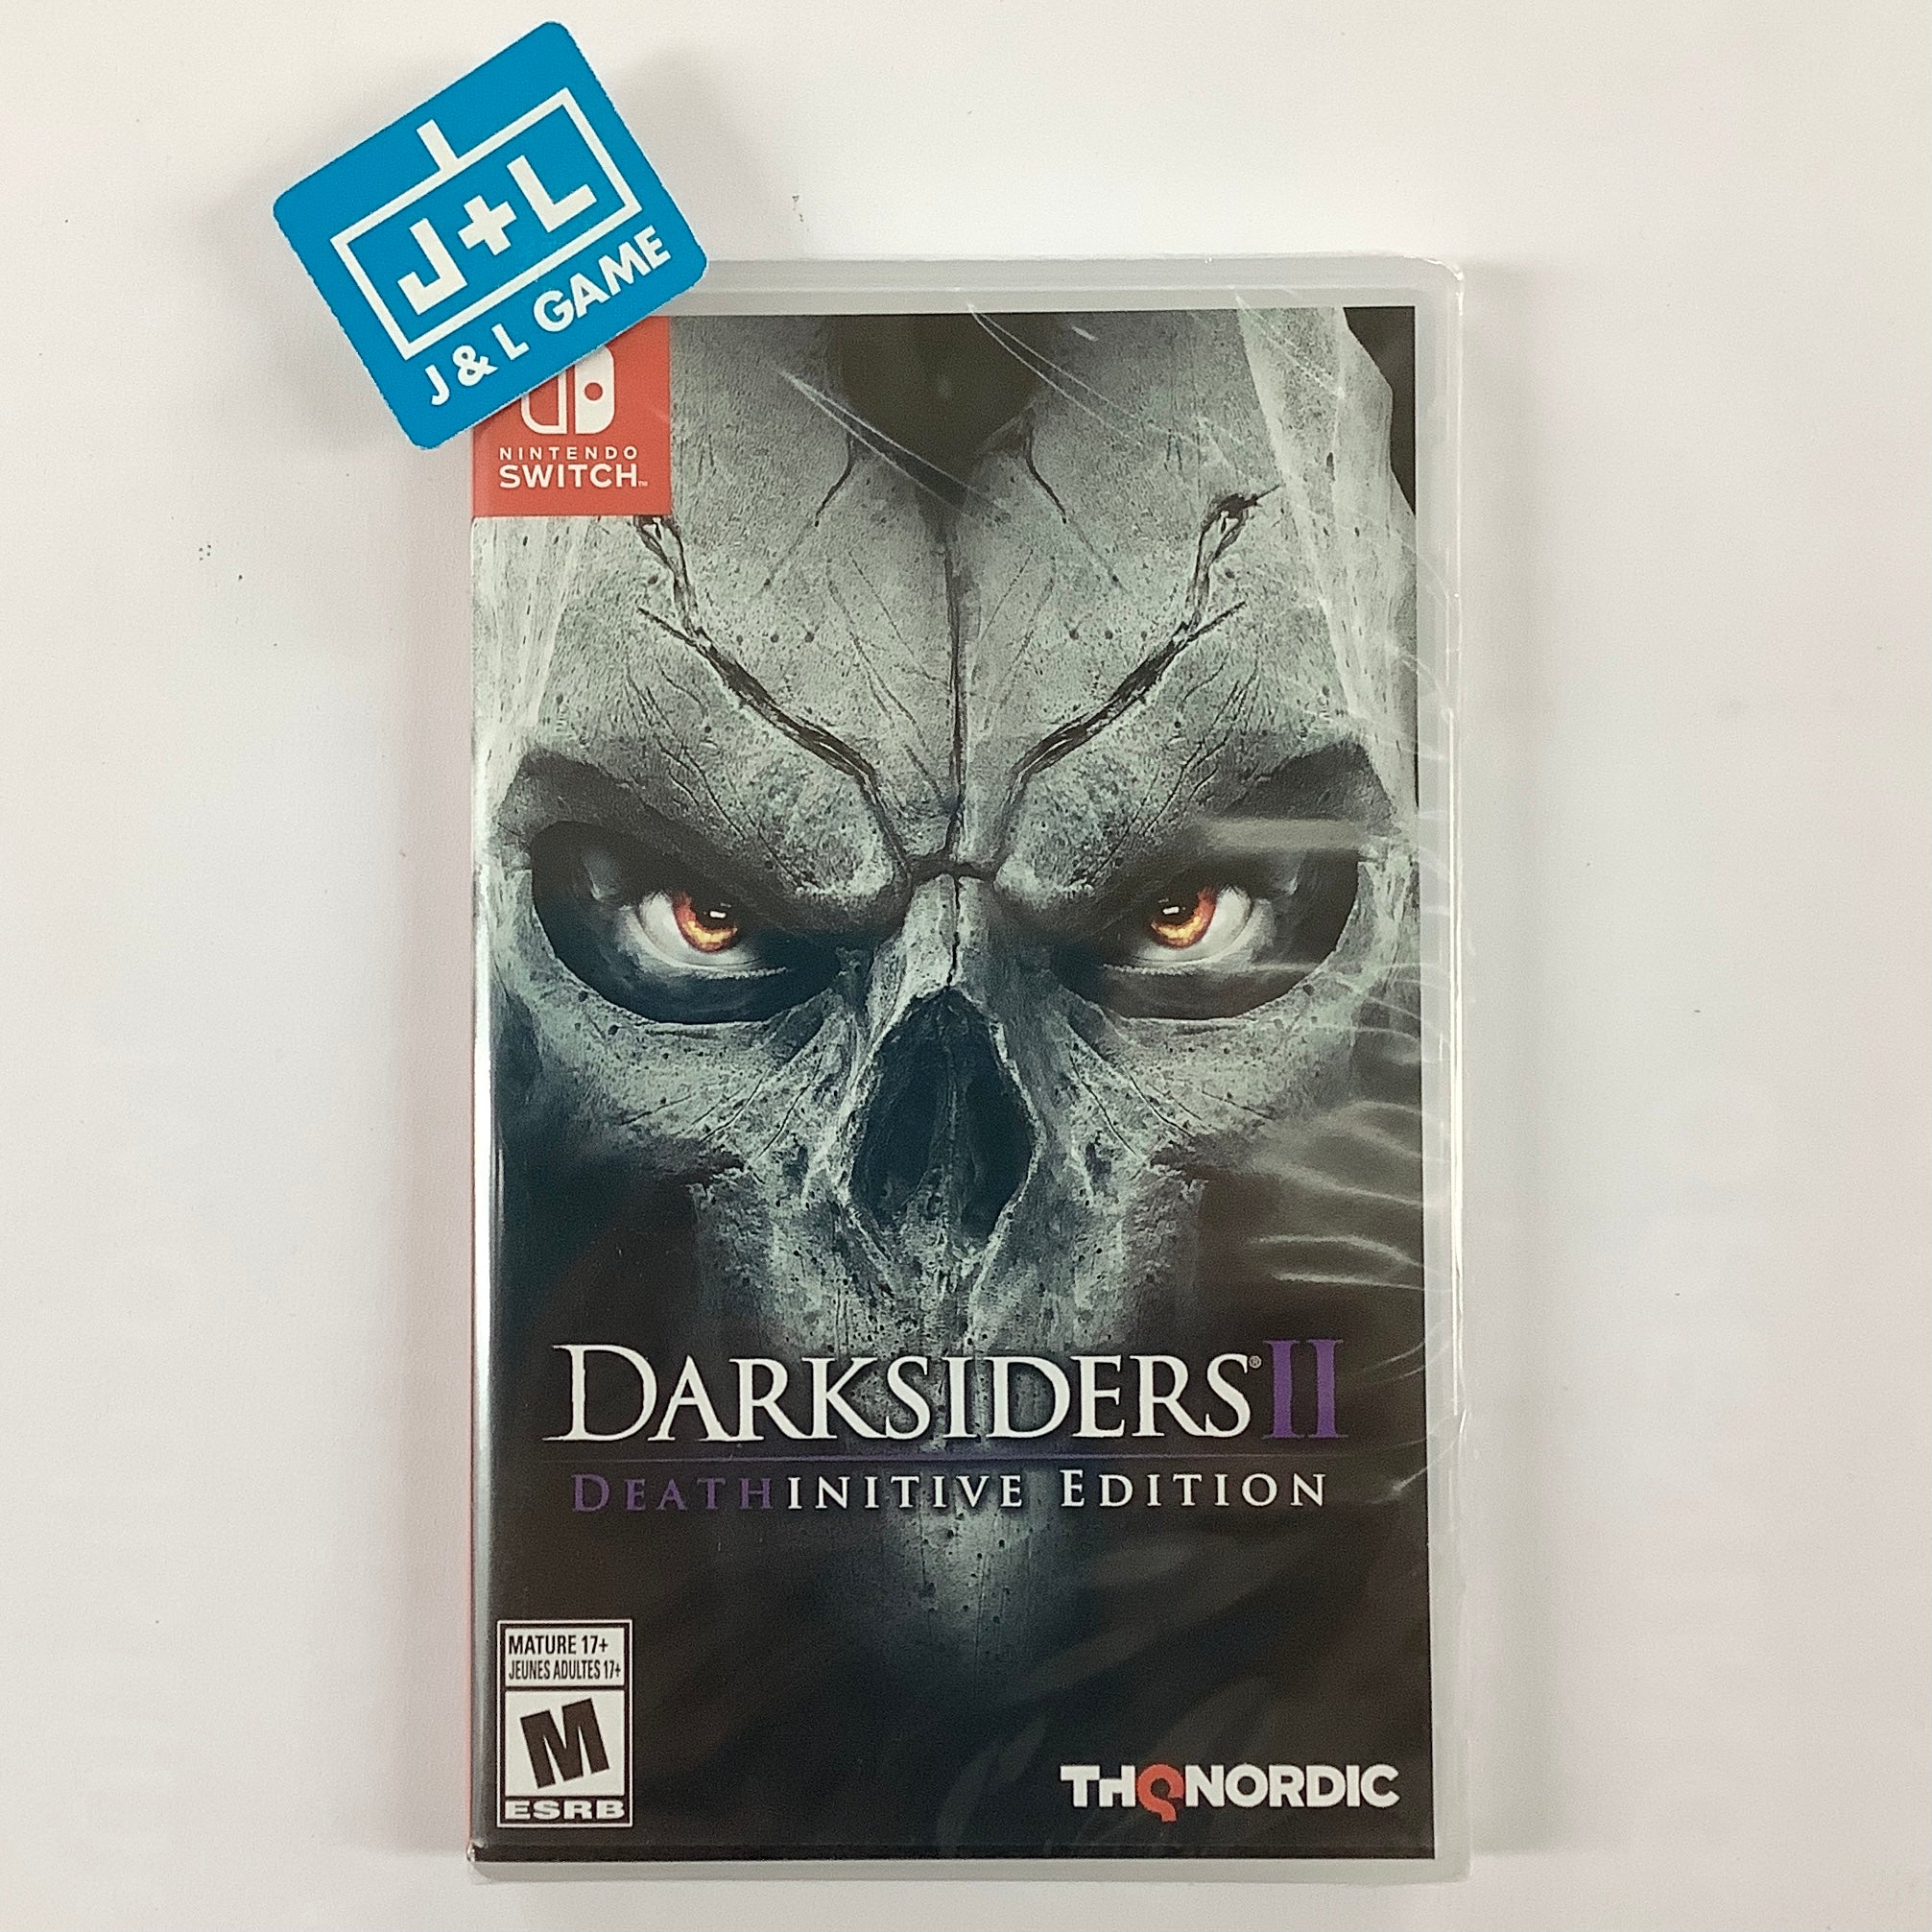 Darksiders II Deathinitive Edition - (NSW) Nintendo Switch Video Games THQ Nordic   